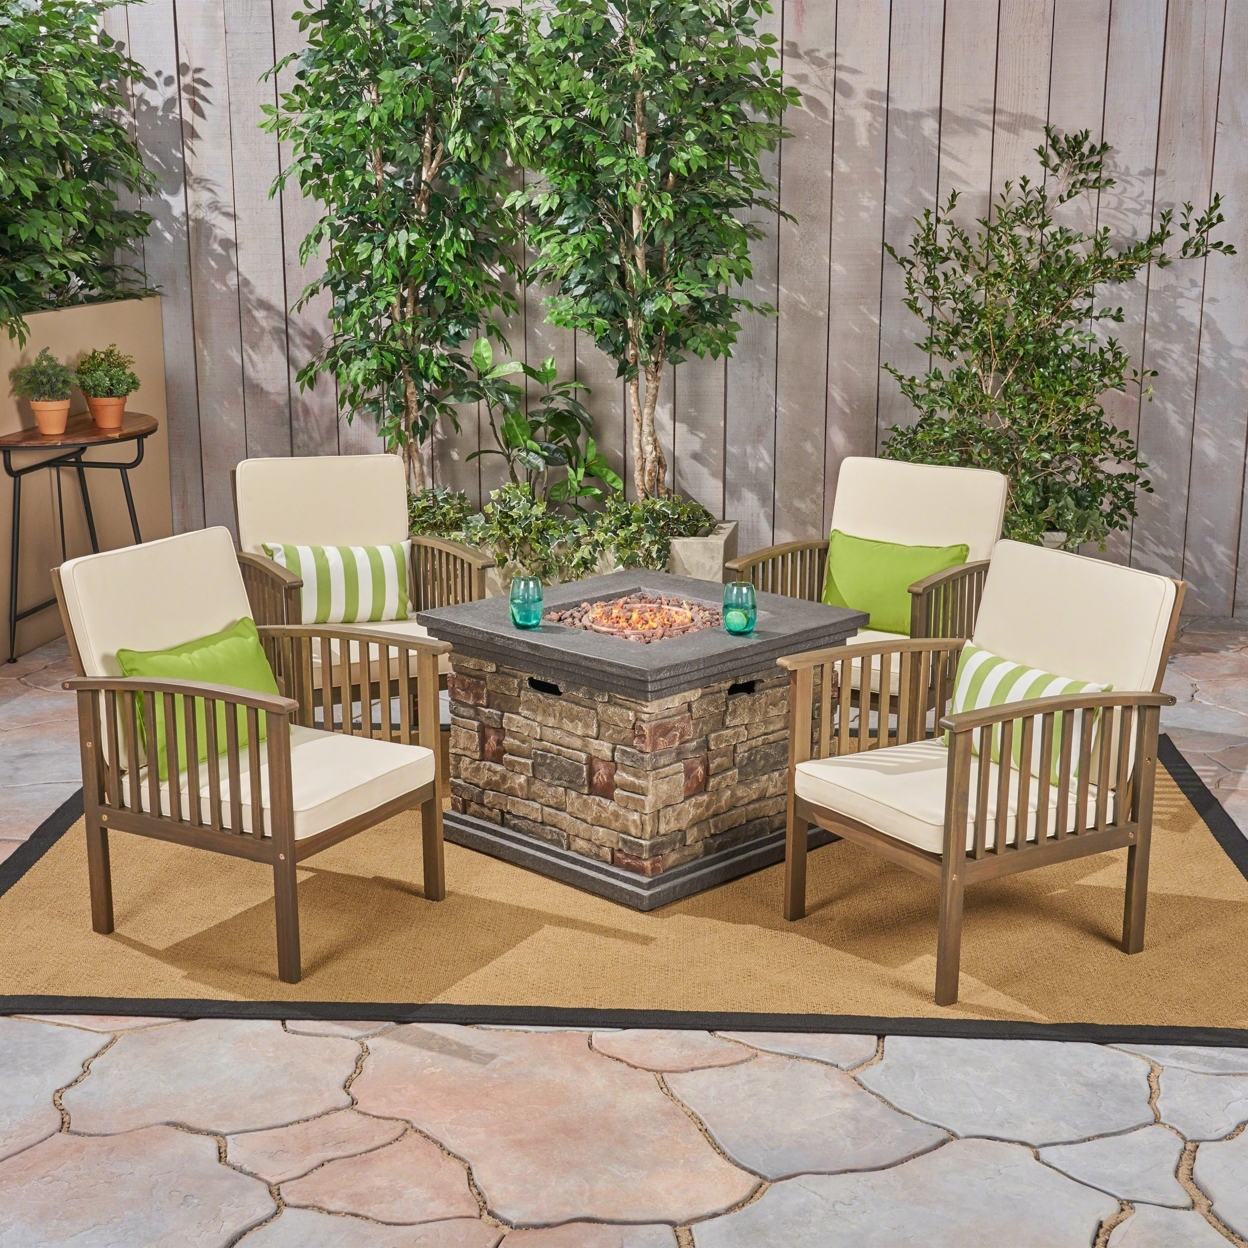 Carol Outdoor 4-Seater Acacia Wood Club Chairs With Firepit, Brown Patina Finish And Cream And Stone - Cream, Gray